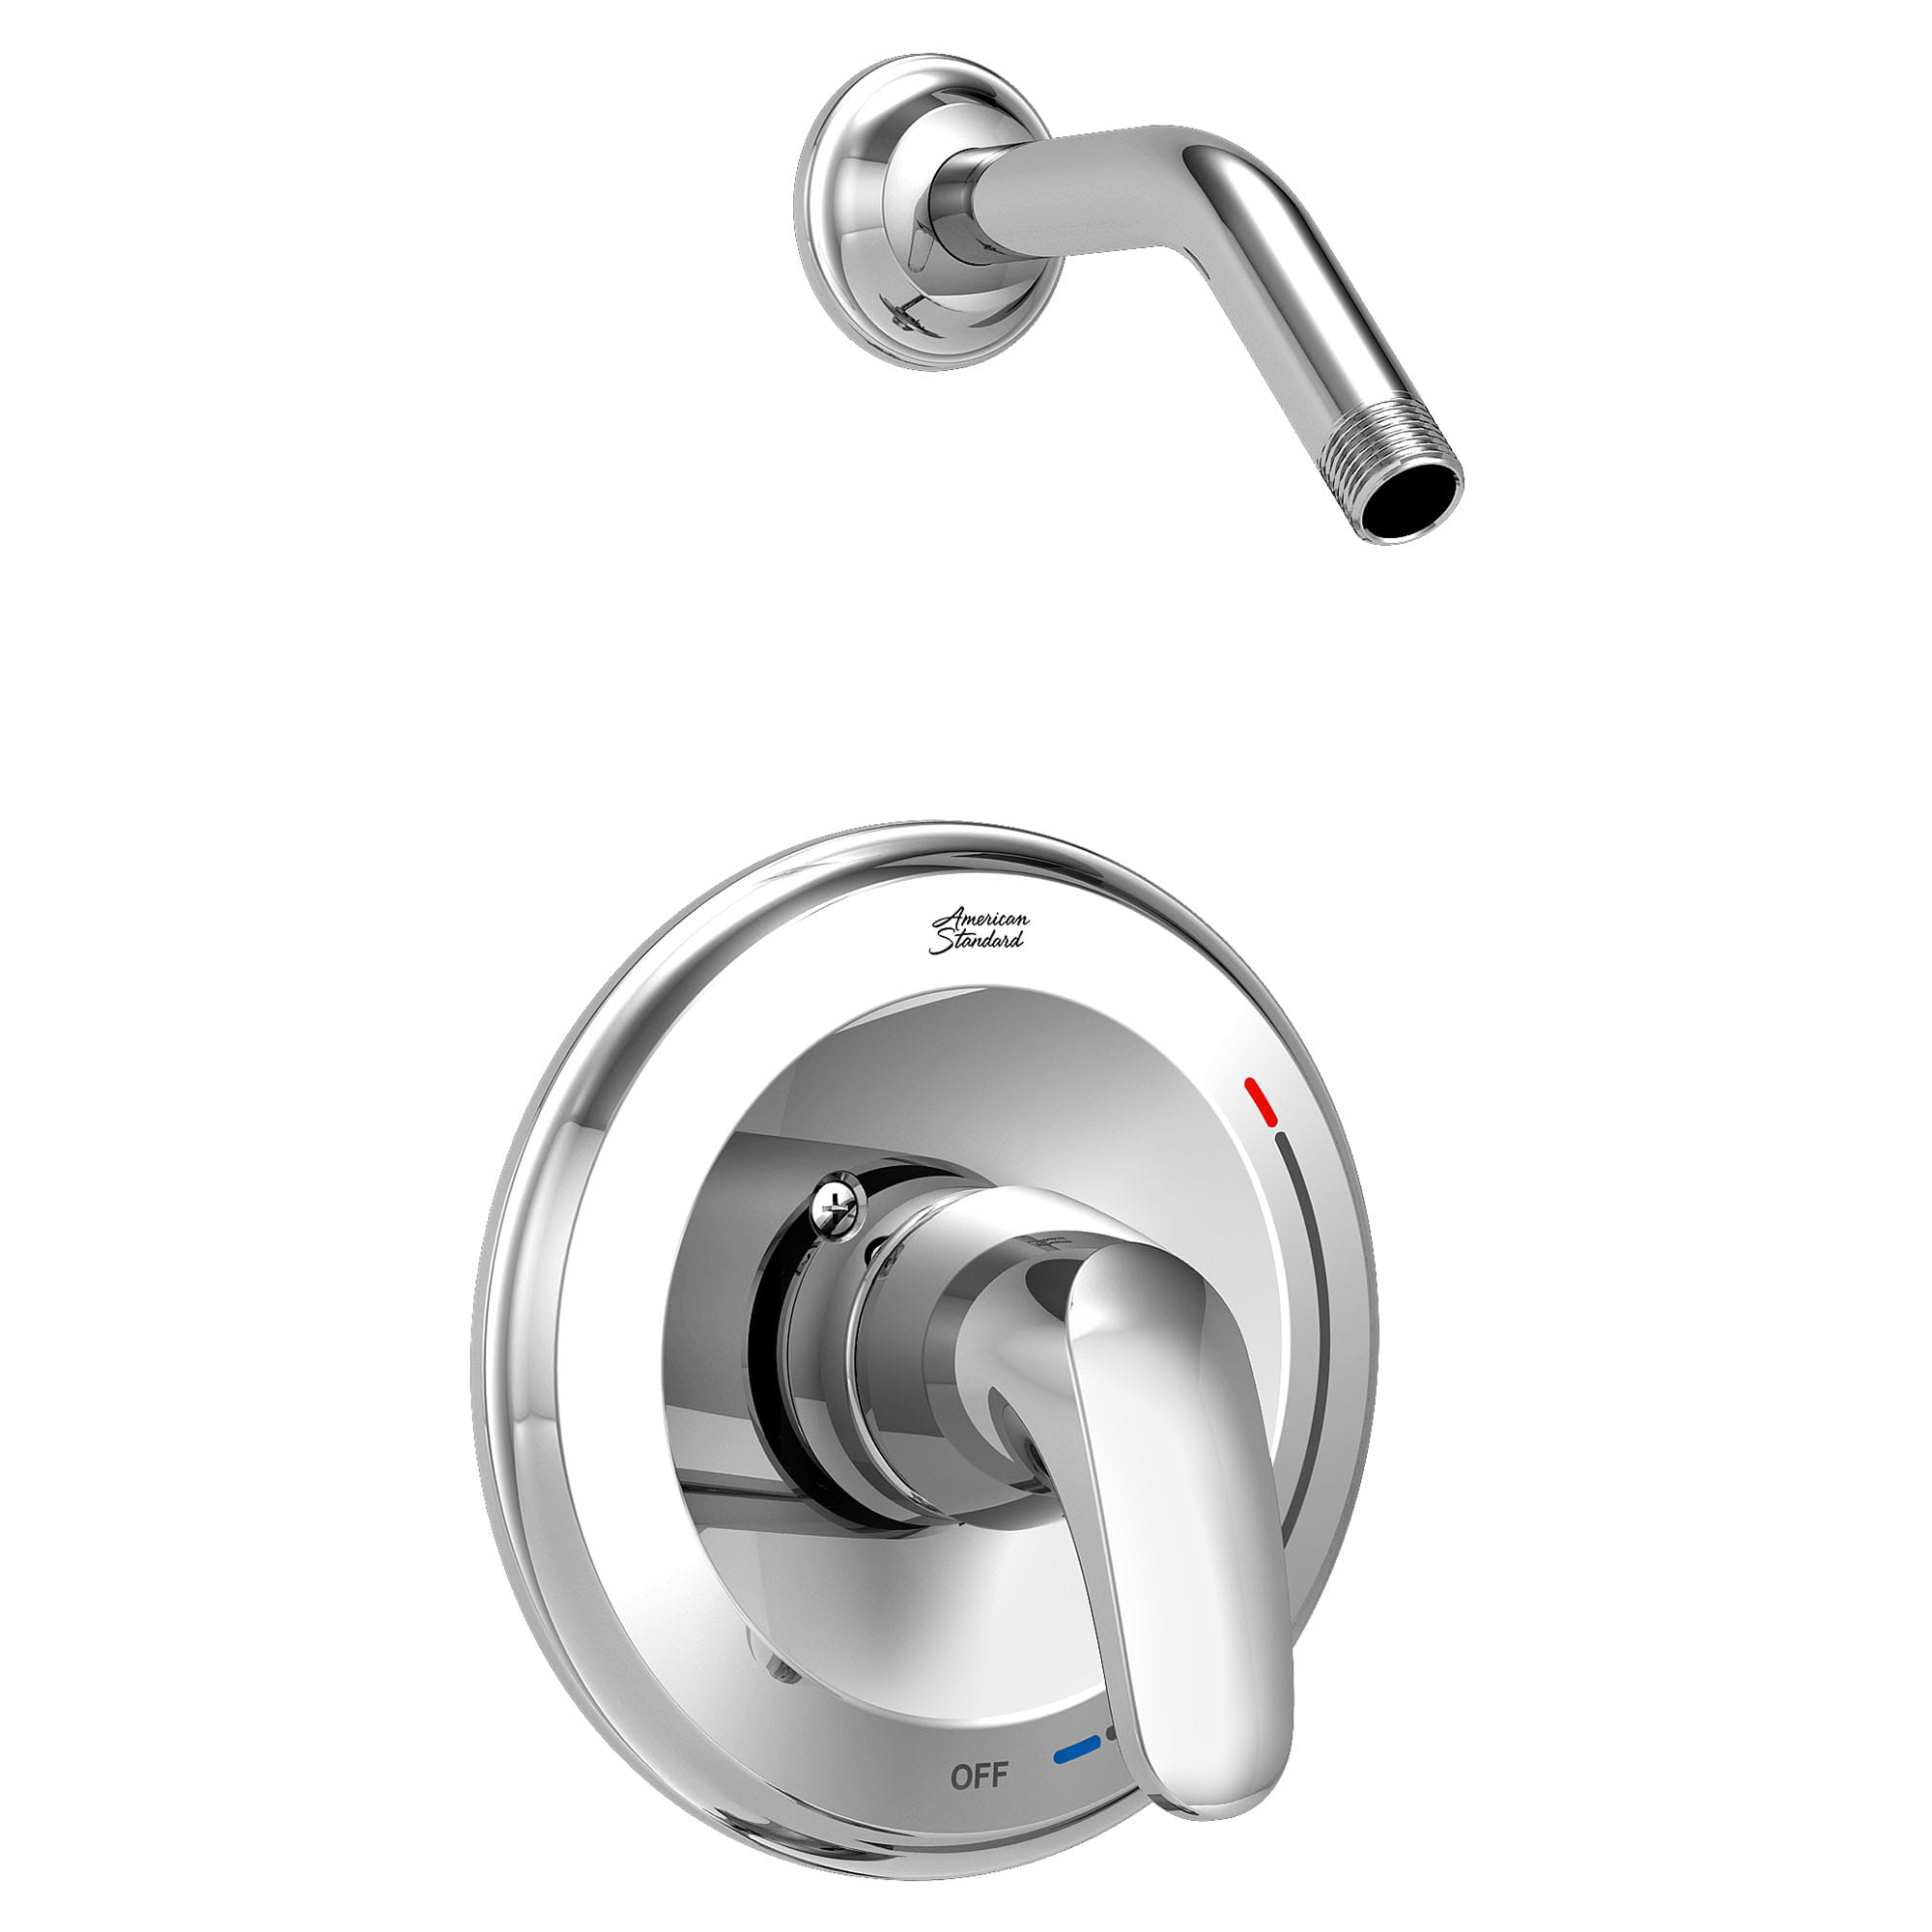 Colony Pro 1.75 GPM Shower Trim Kit without Showerhead with Lever Handle